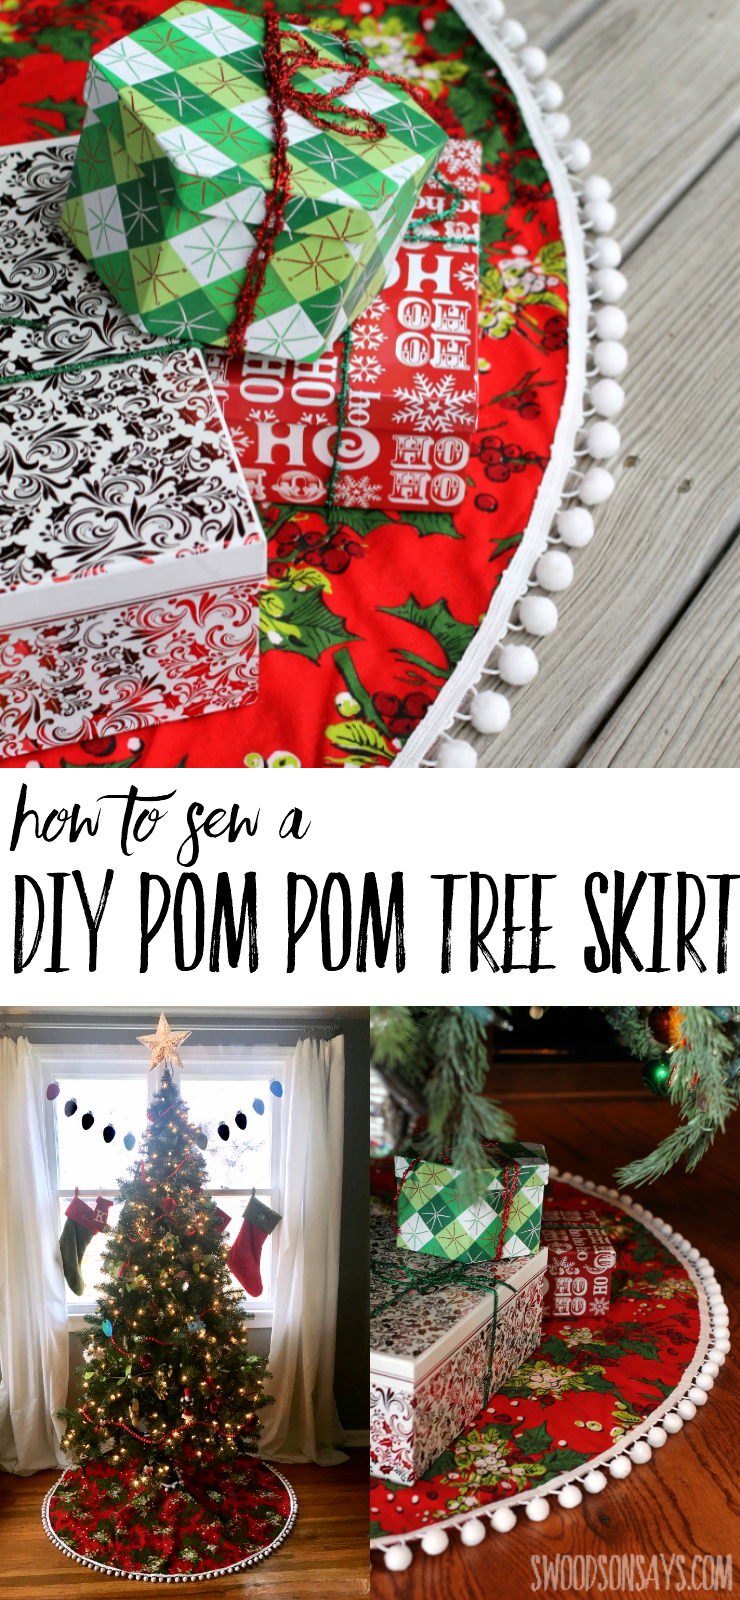  How To Sew a DIY Pom Pom Tree Skirt - fun Christmas sewing tutorial that is easy and fast to make. It isn't hard, learning how to make a tree skirt without a pattern. Pom pom Christmas decor is fun and modern! #christmas #christmasinjuly #christmassewing #christmastreeskirt #pompom #sewing #sewingtutorial